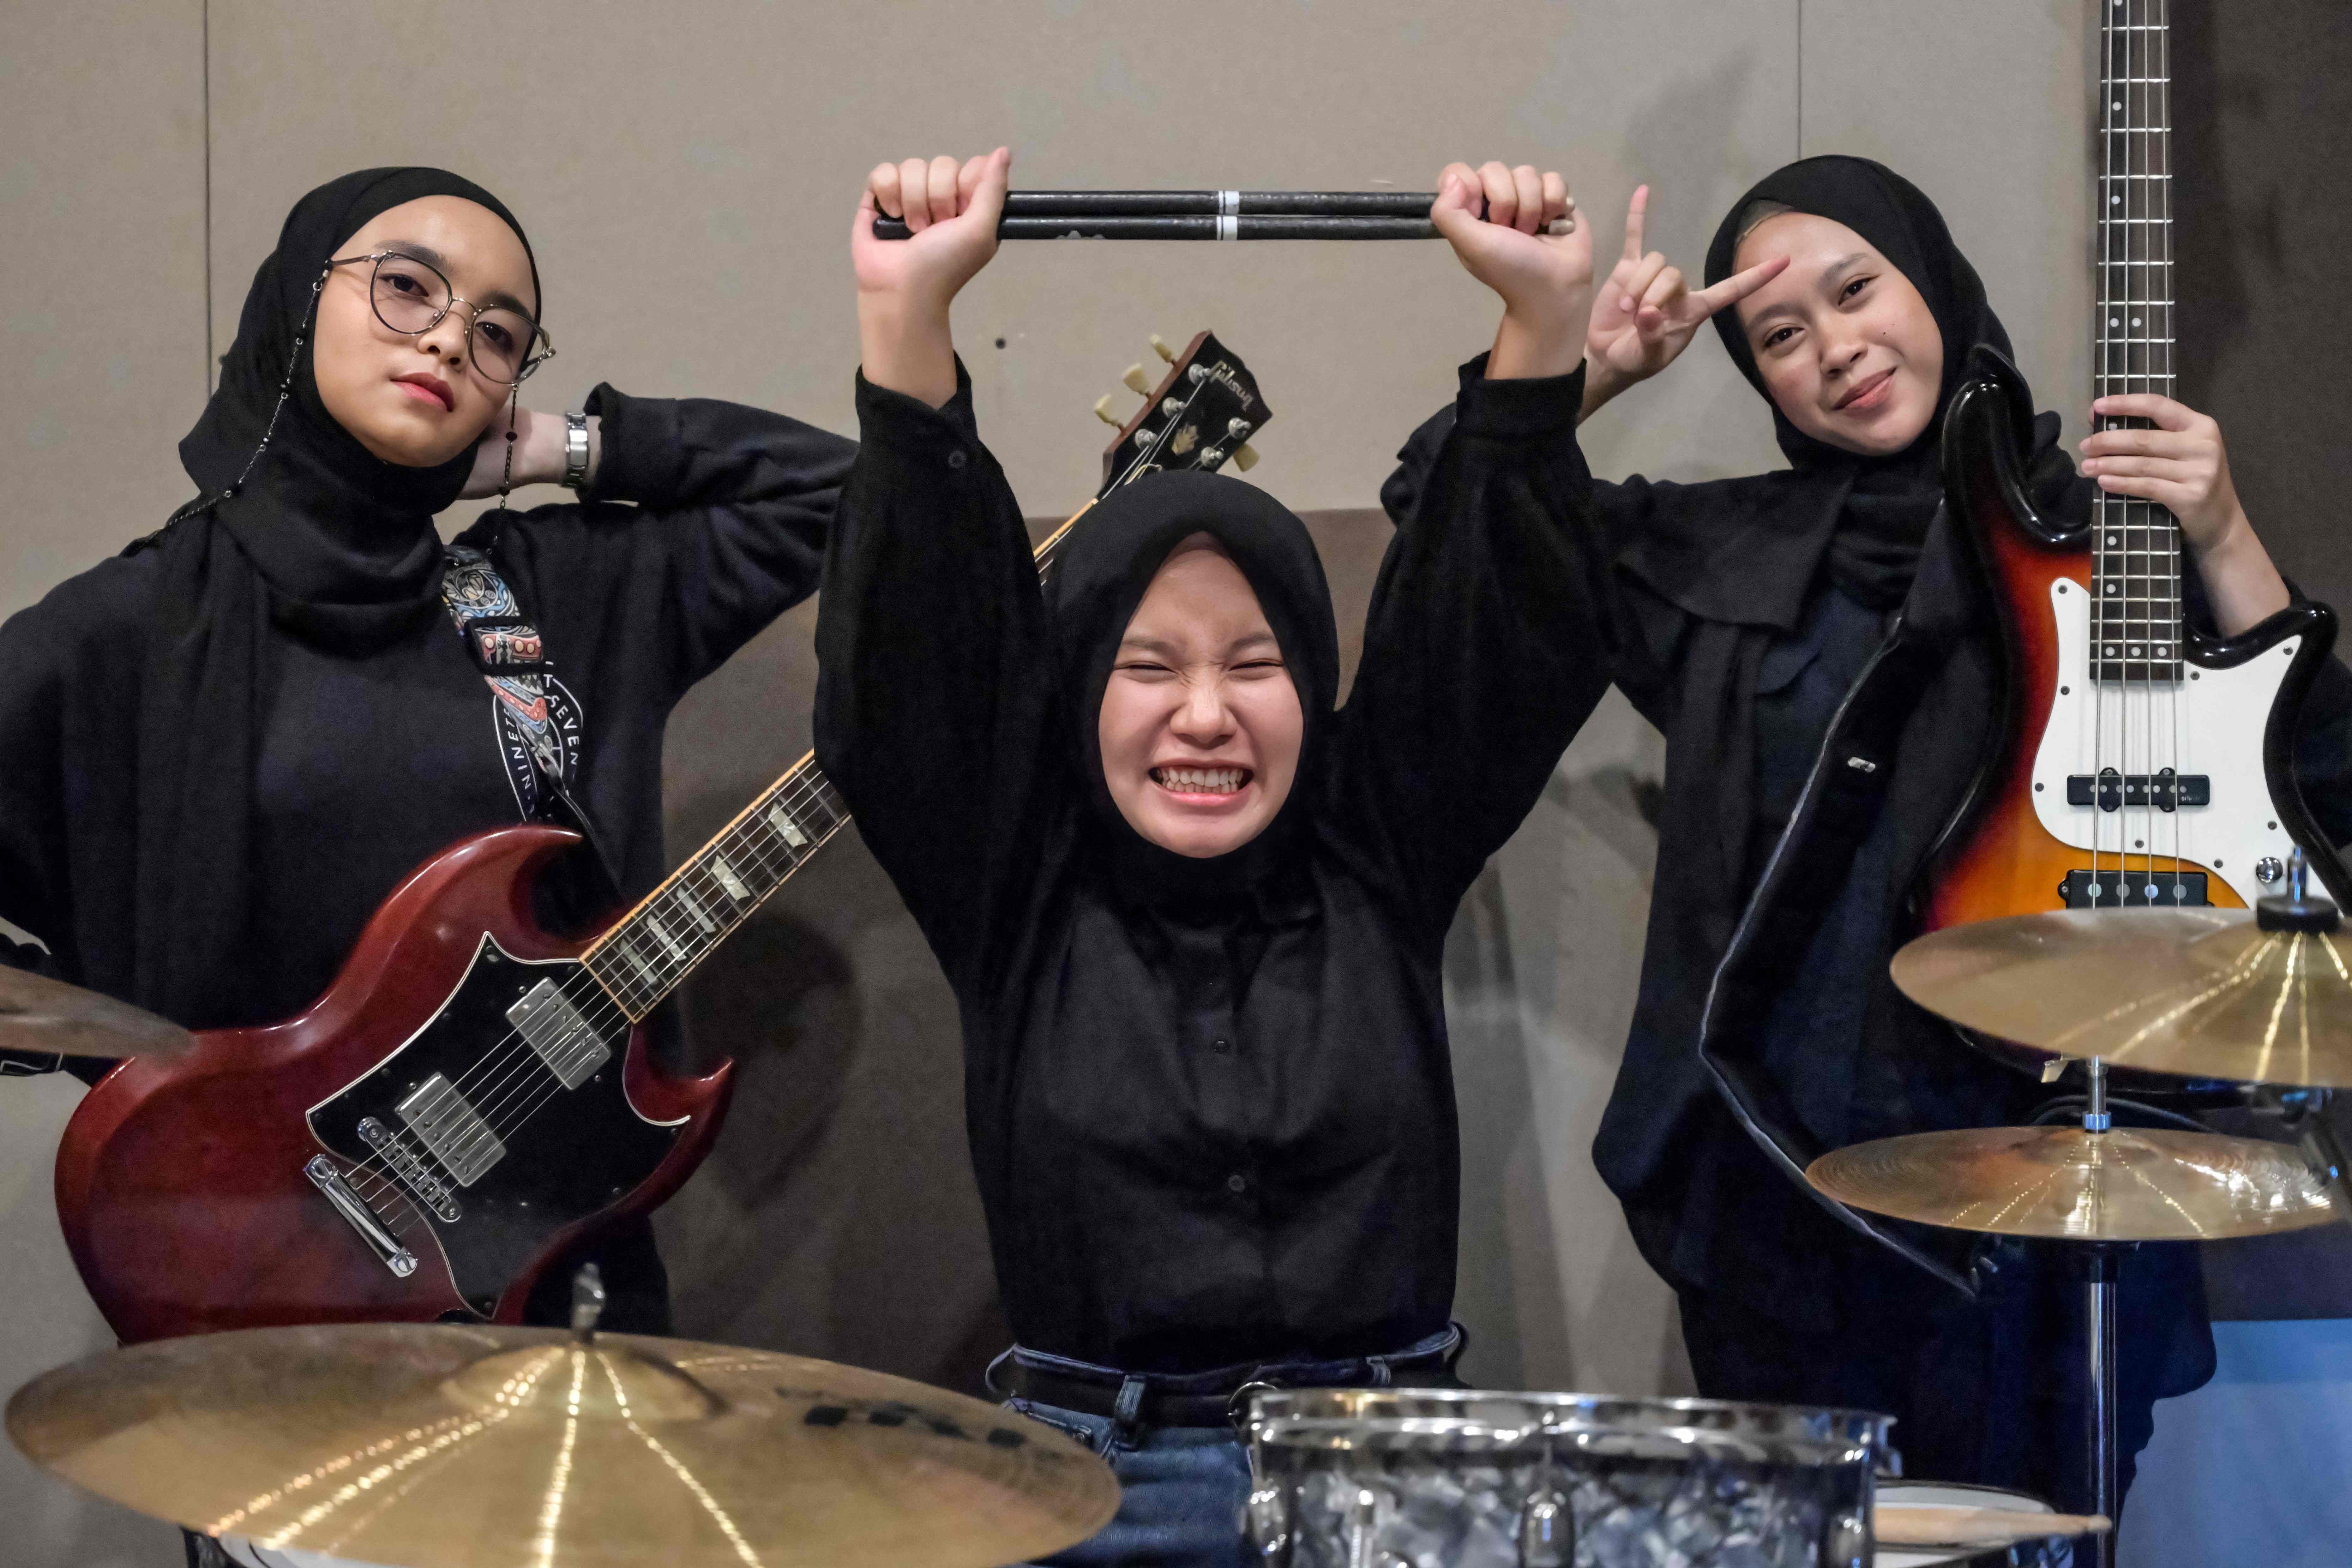 For Indonesia's all-girl heavy metal band, music is the 'voice of